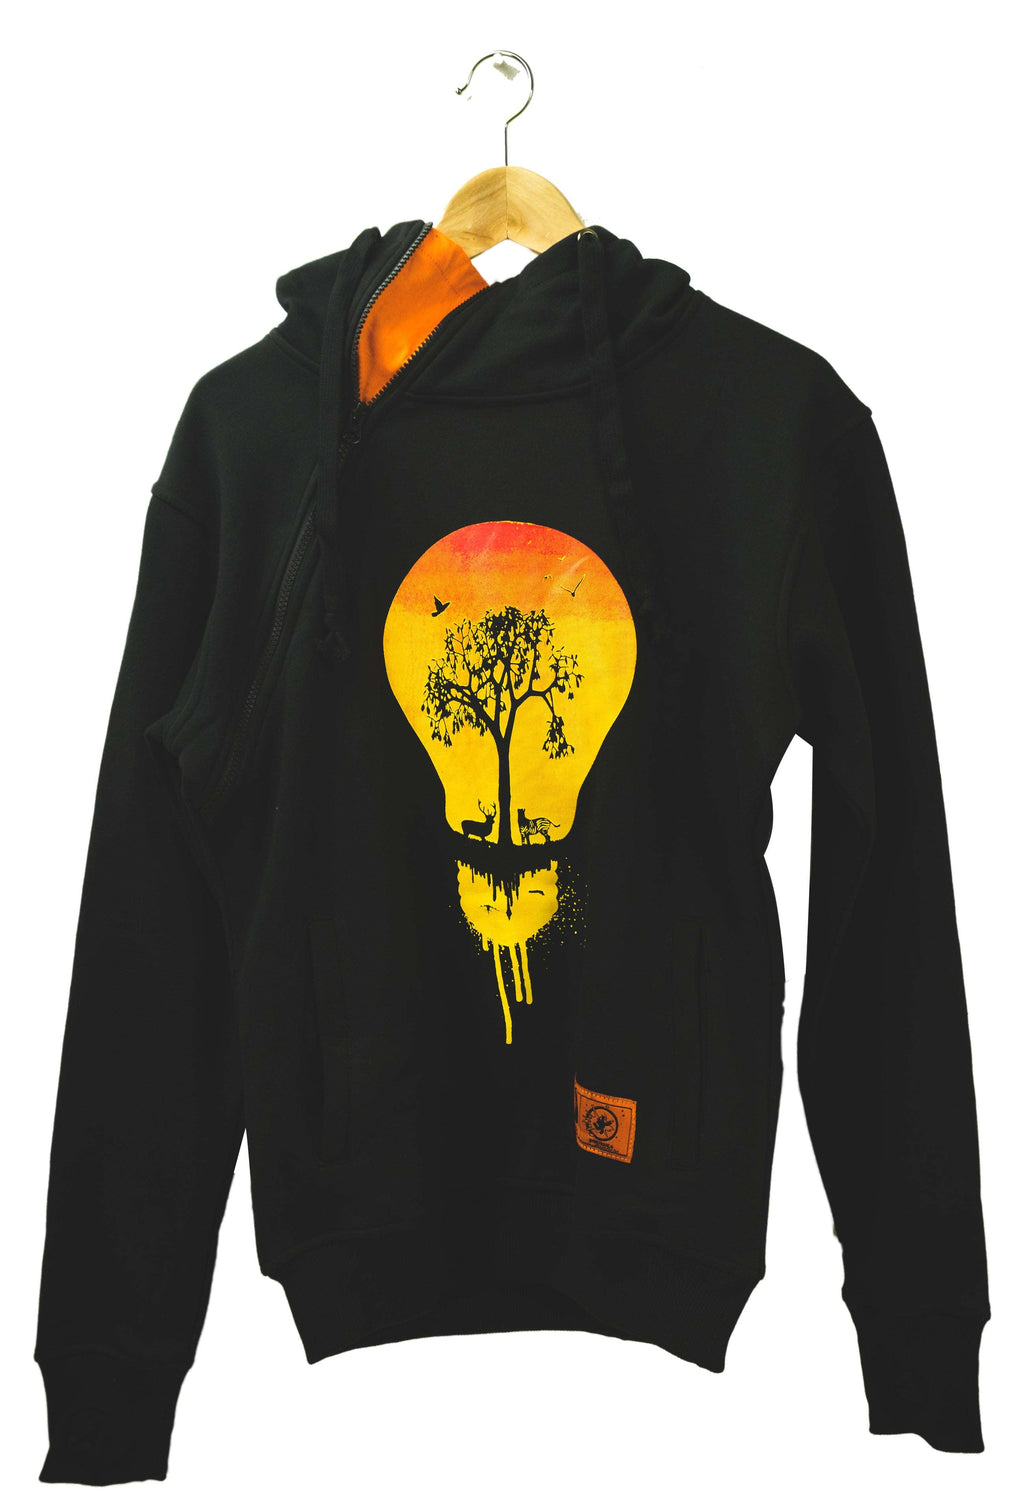 The two worlds Hoodie